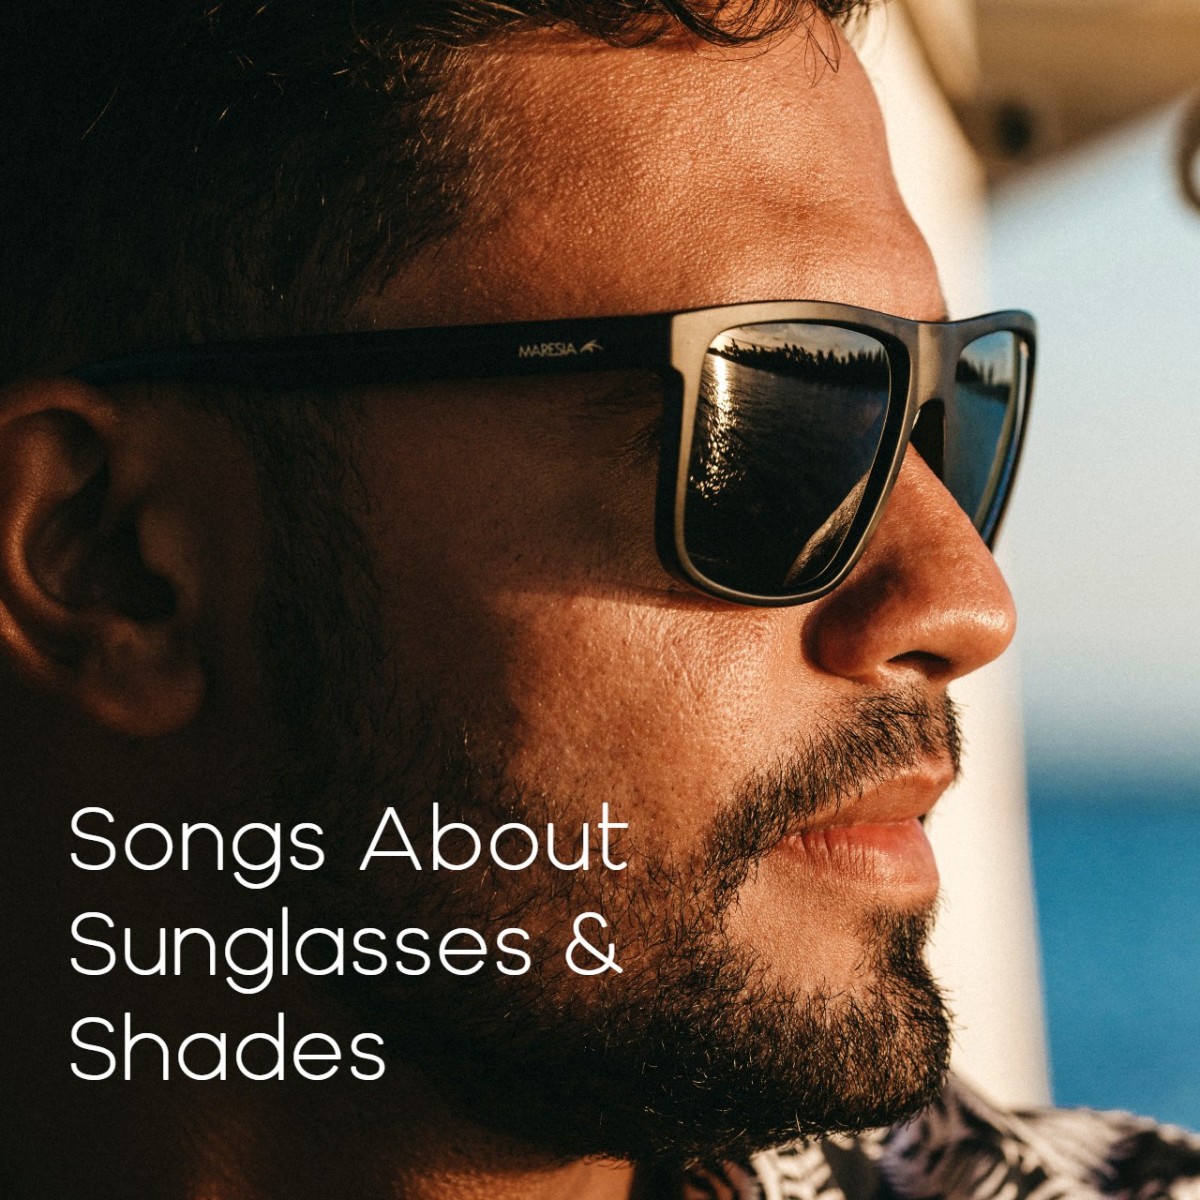 Whether you wear sunglasses to look fashionable, hide your emotions, or protect your eyes from the glare of the sun, make a playlist of pop, rock, country, and R&B songs about sunglasses and shades.